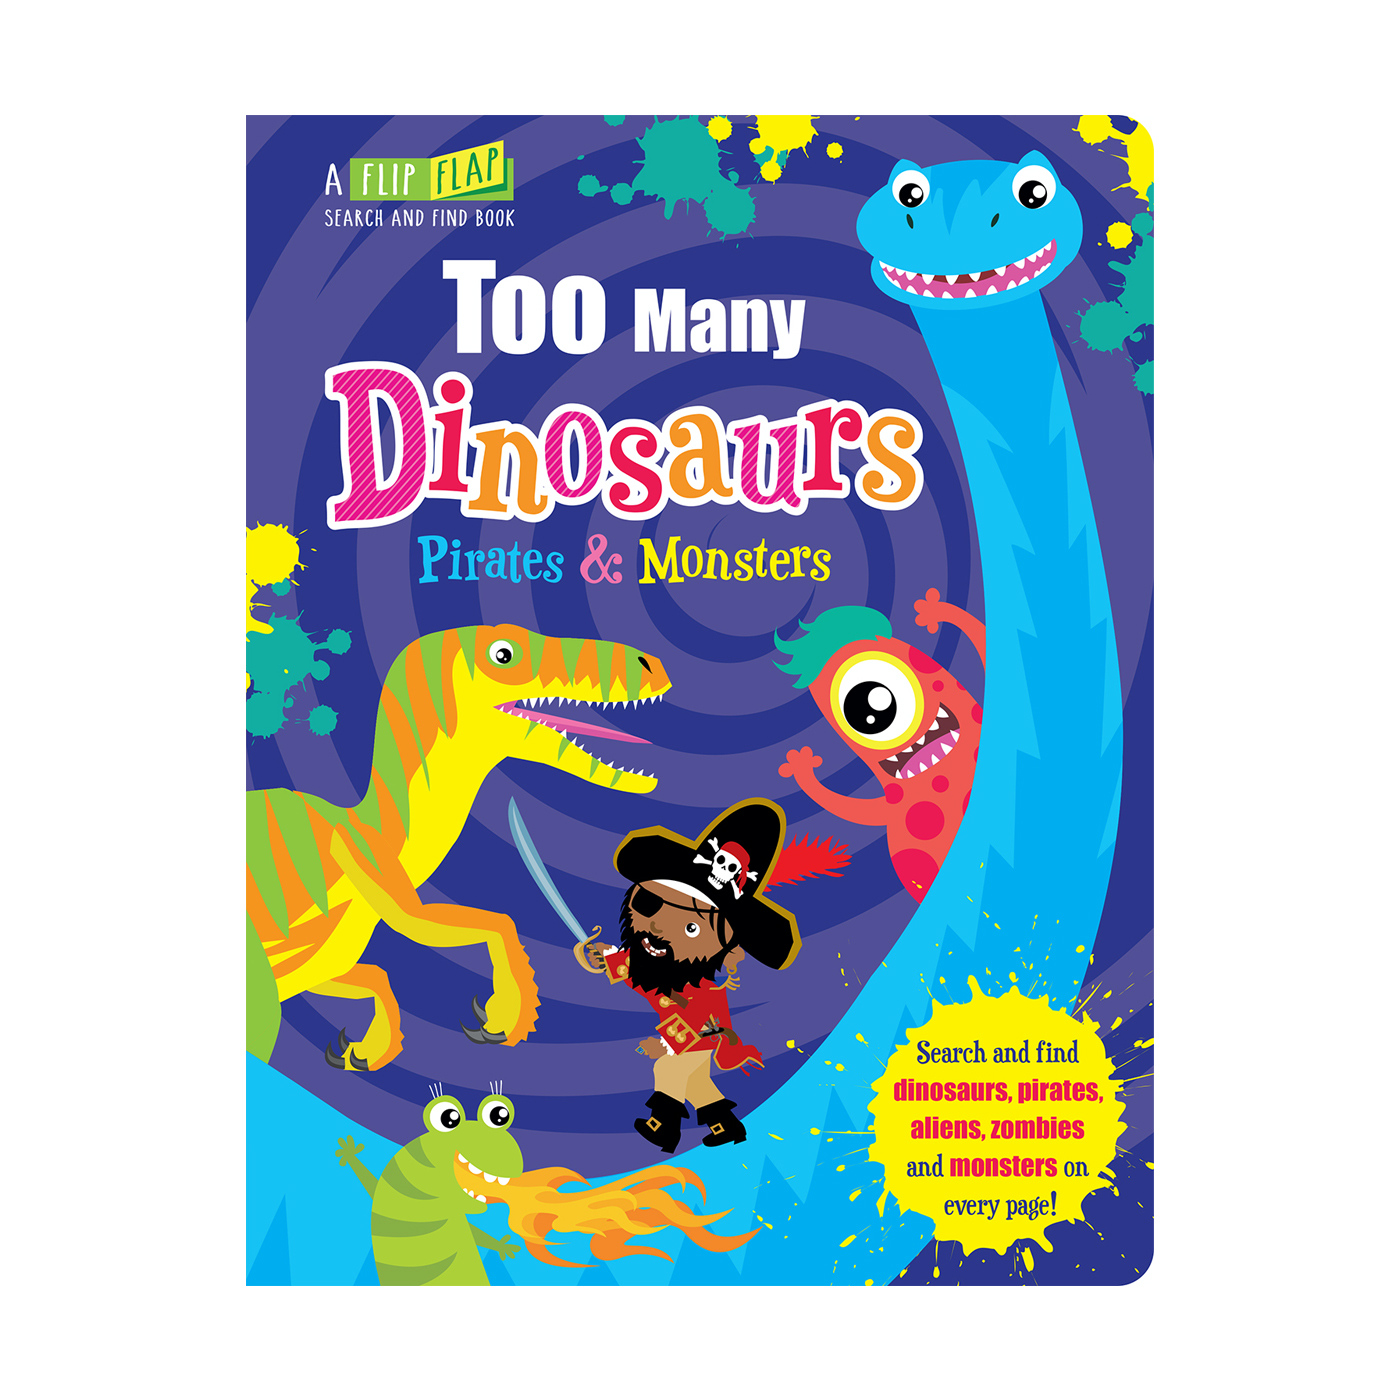 IMAGINE THAT Too Many Dinosaurs, Pirates & Monsters